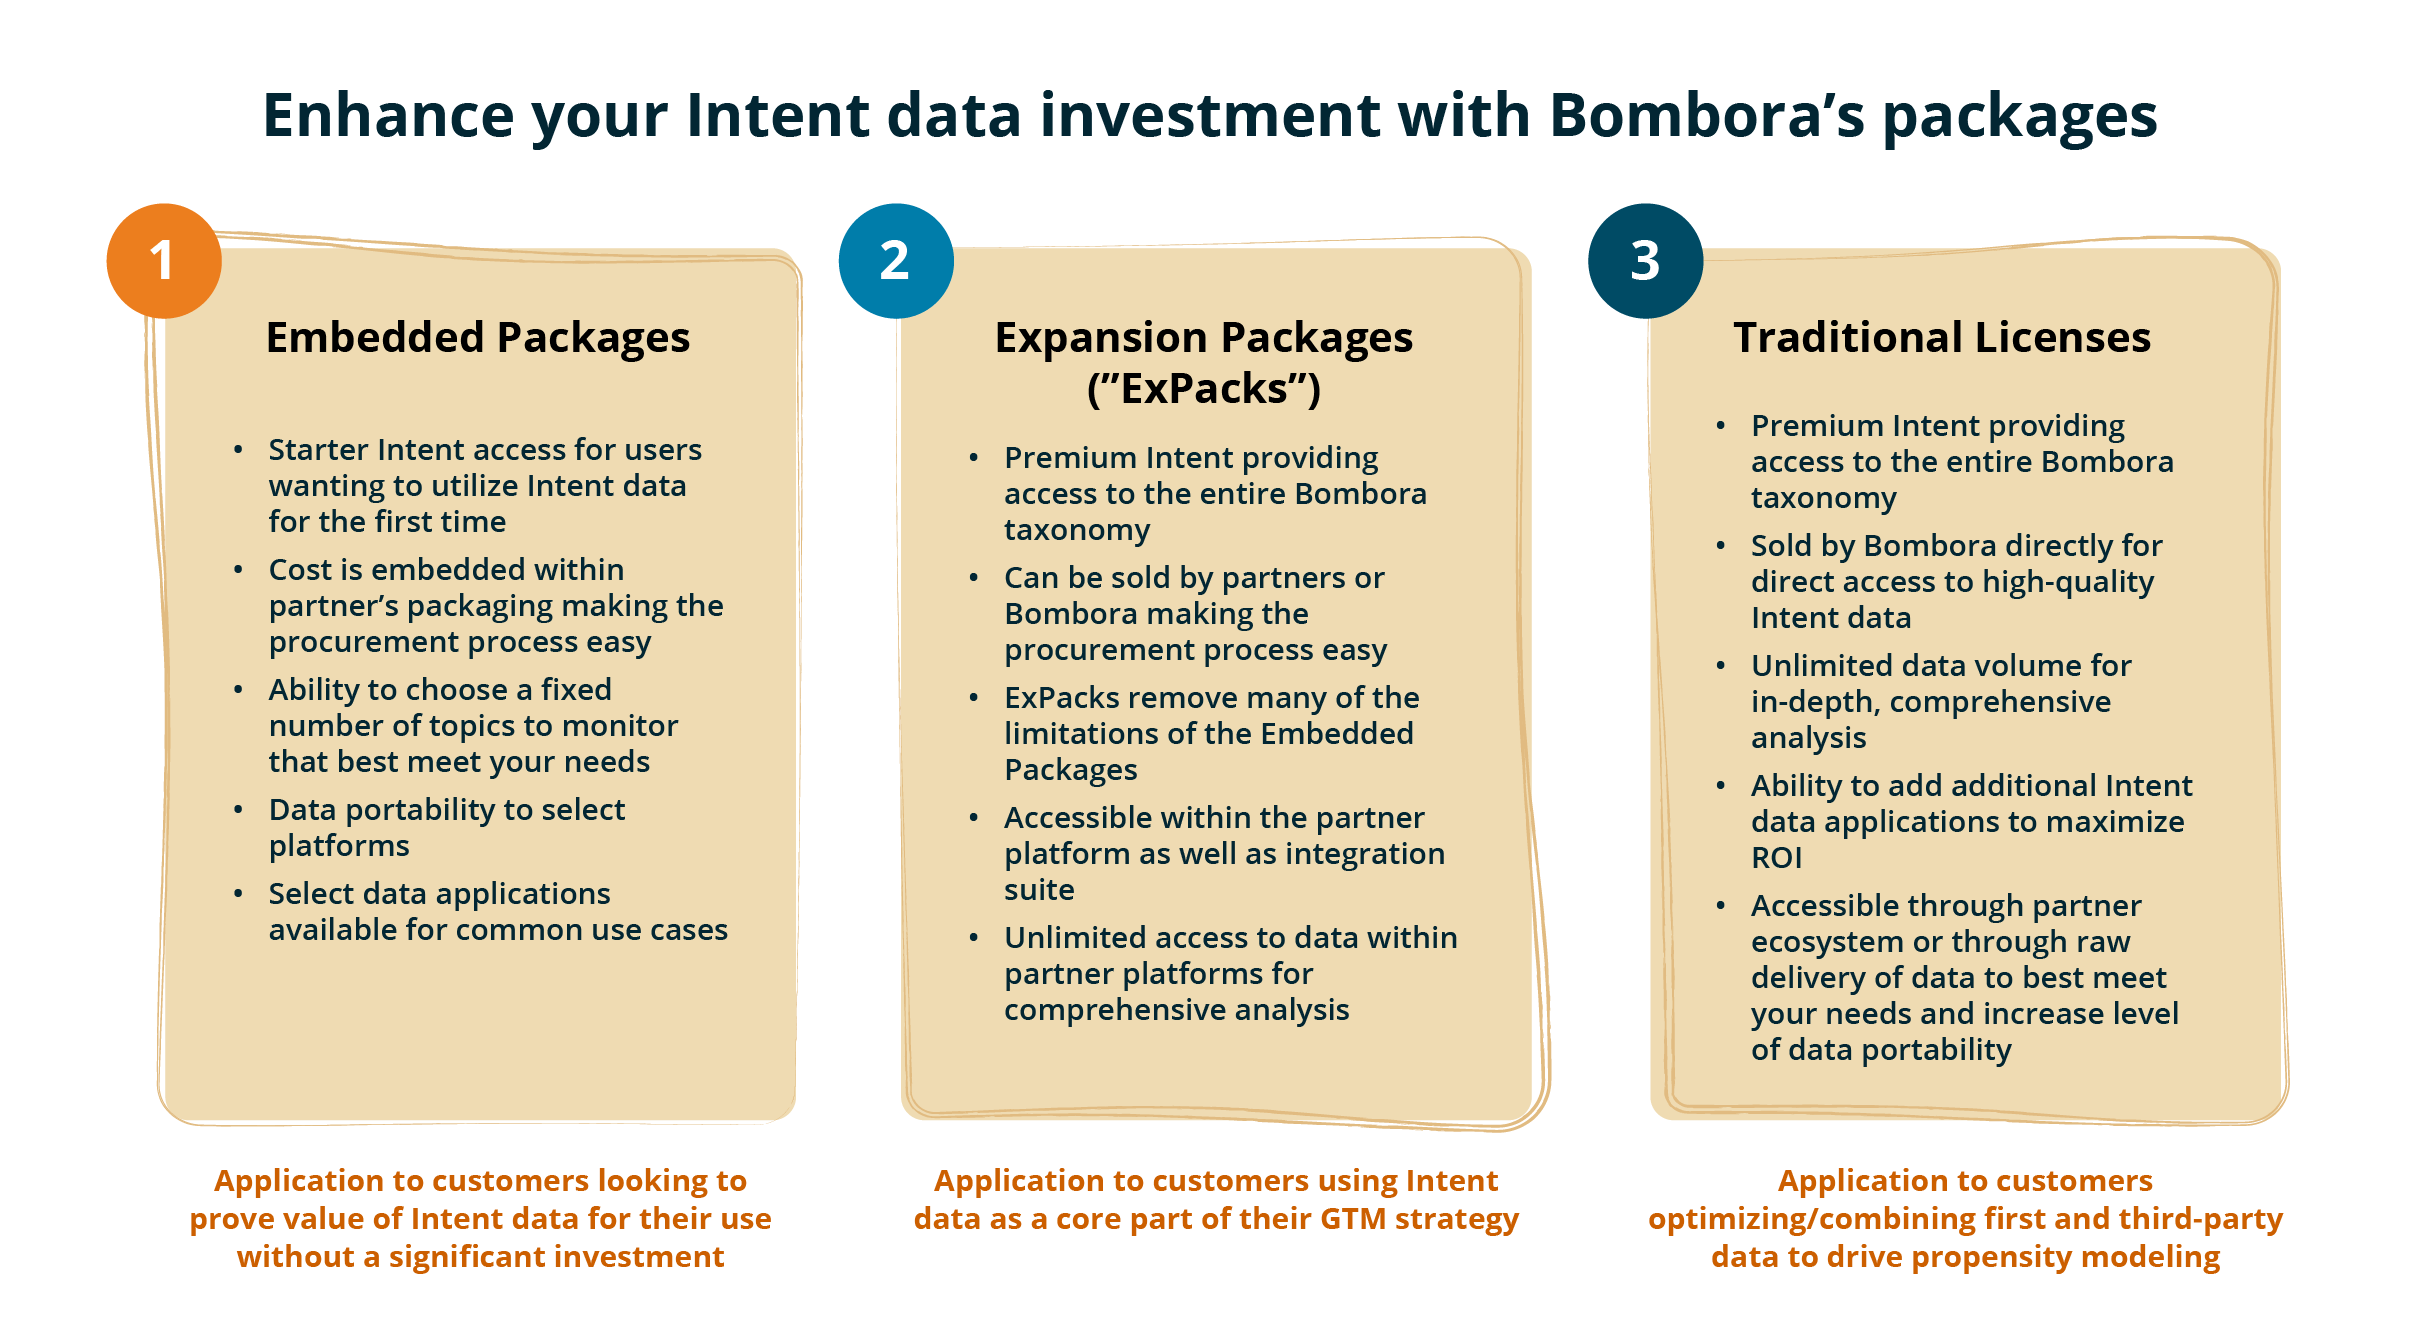 Sales and marketing intelligence - Bombora Intent data packages for customers